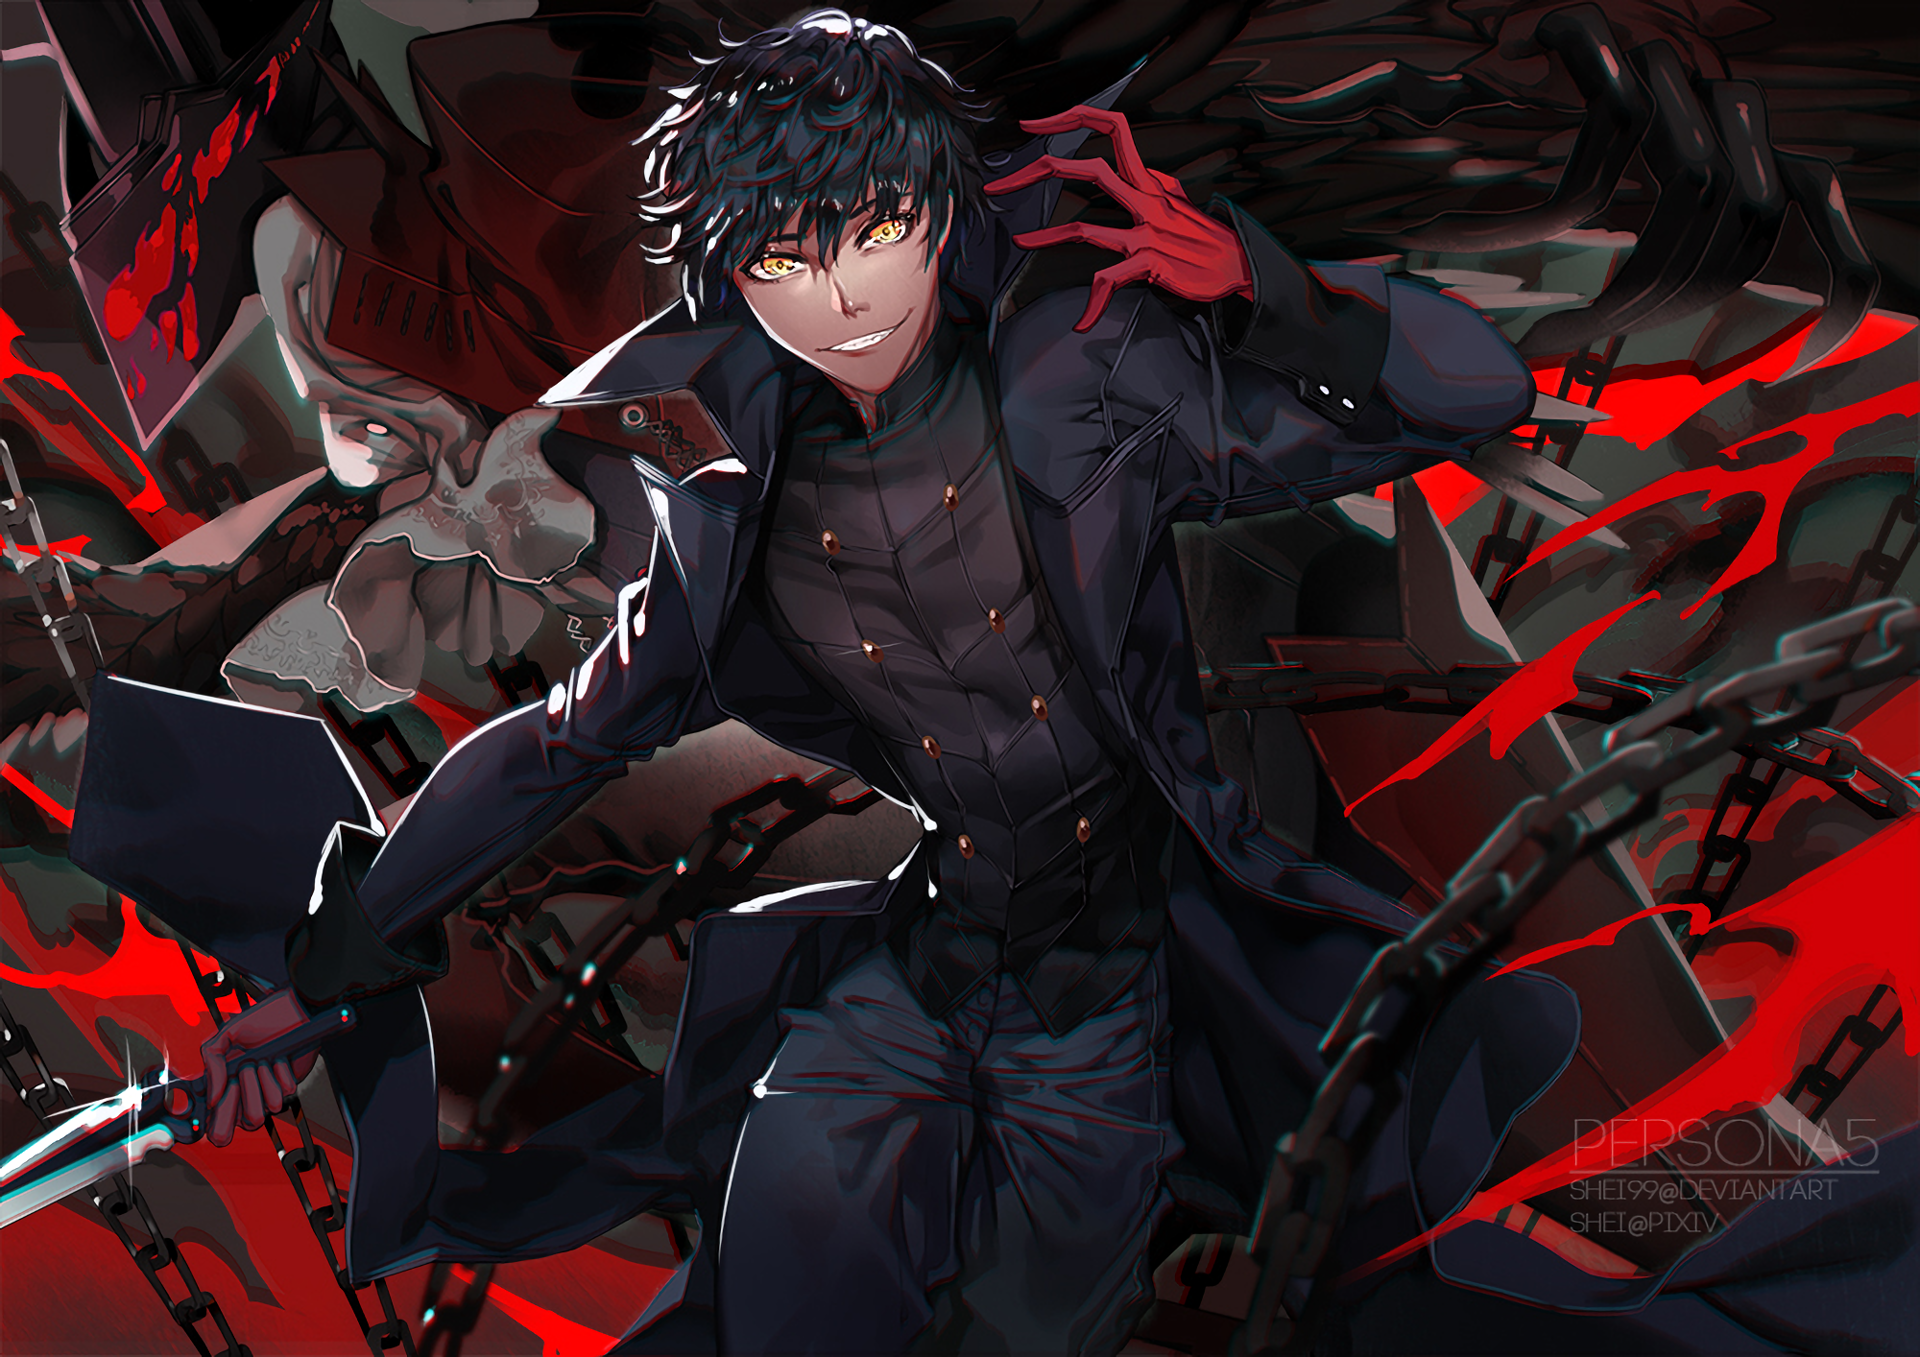 Persona 5 Wallpapers, Pictures, Images